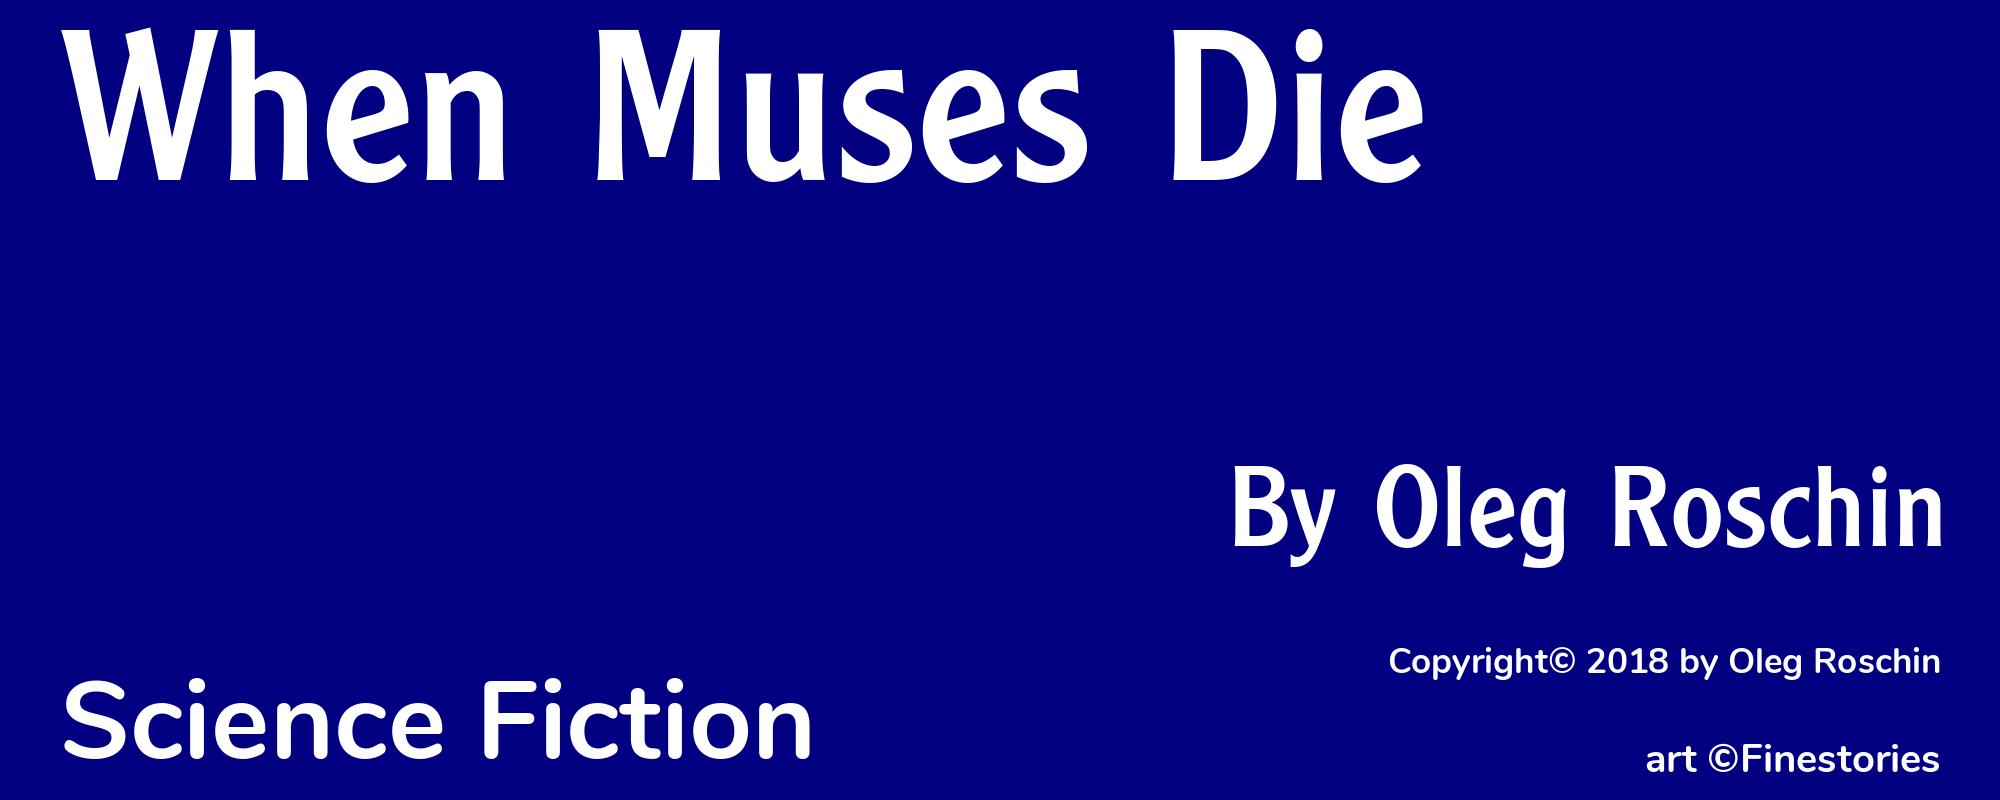 When Muses Die - Cover